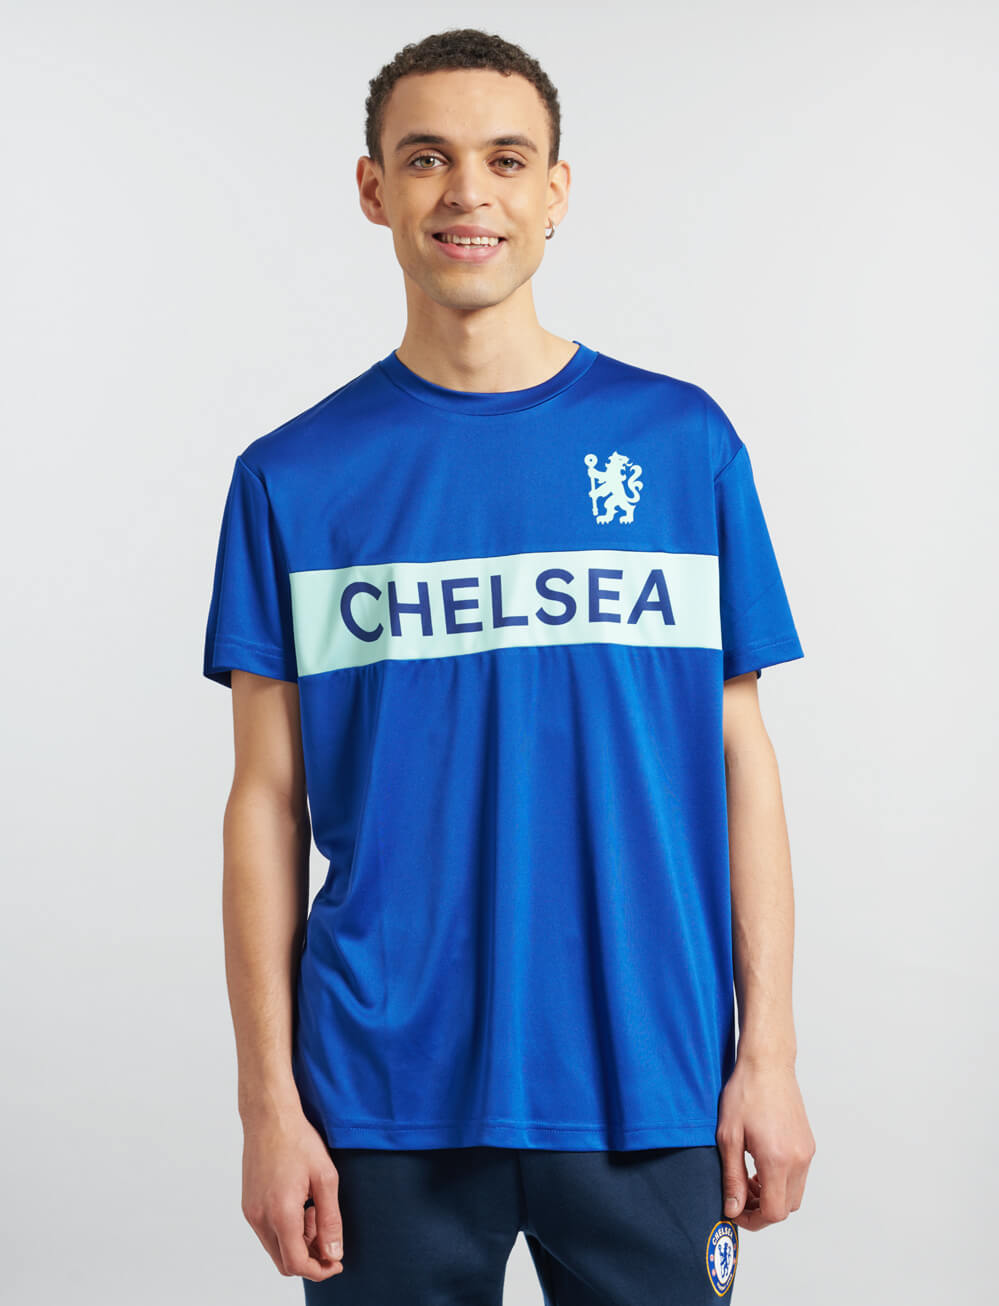 Official Chelsea Wordmark T-Shirt - Royal Blue - The World Football Store